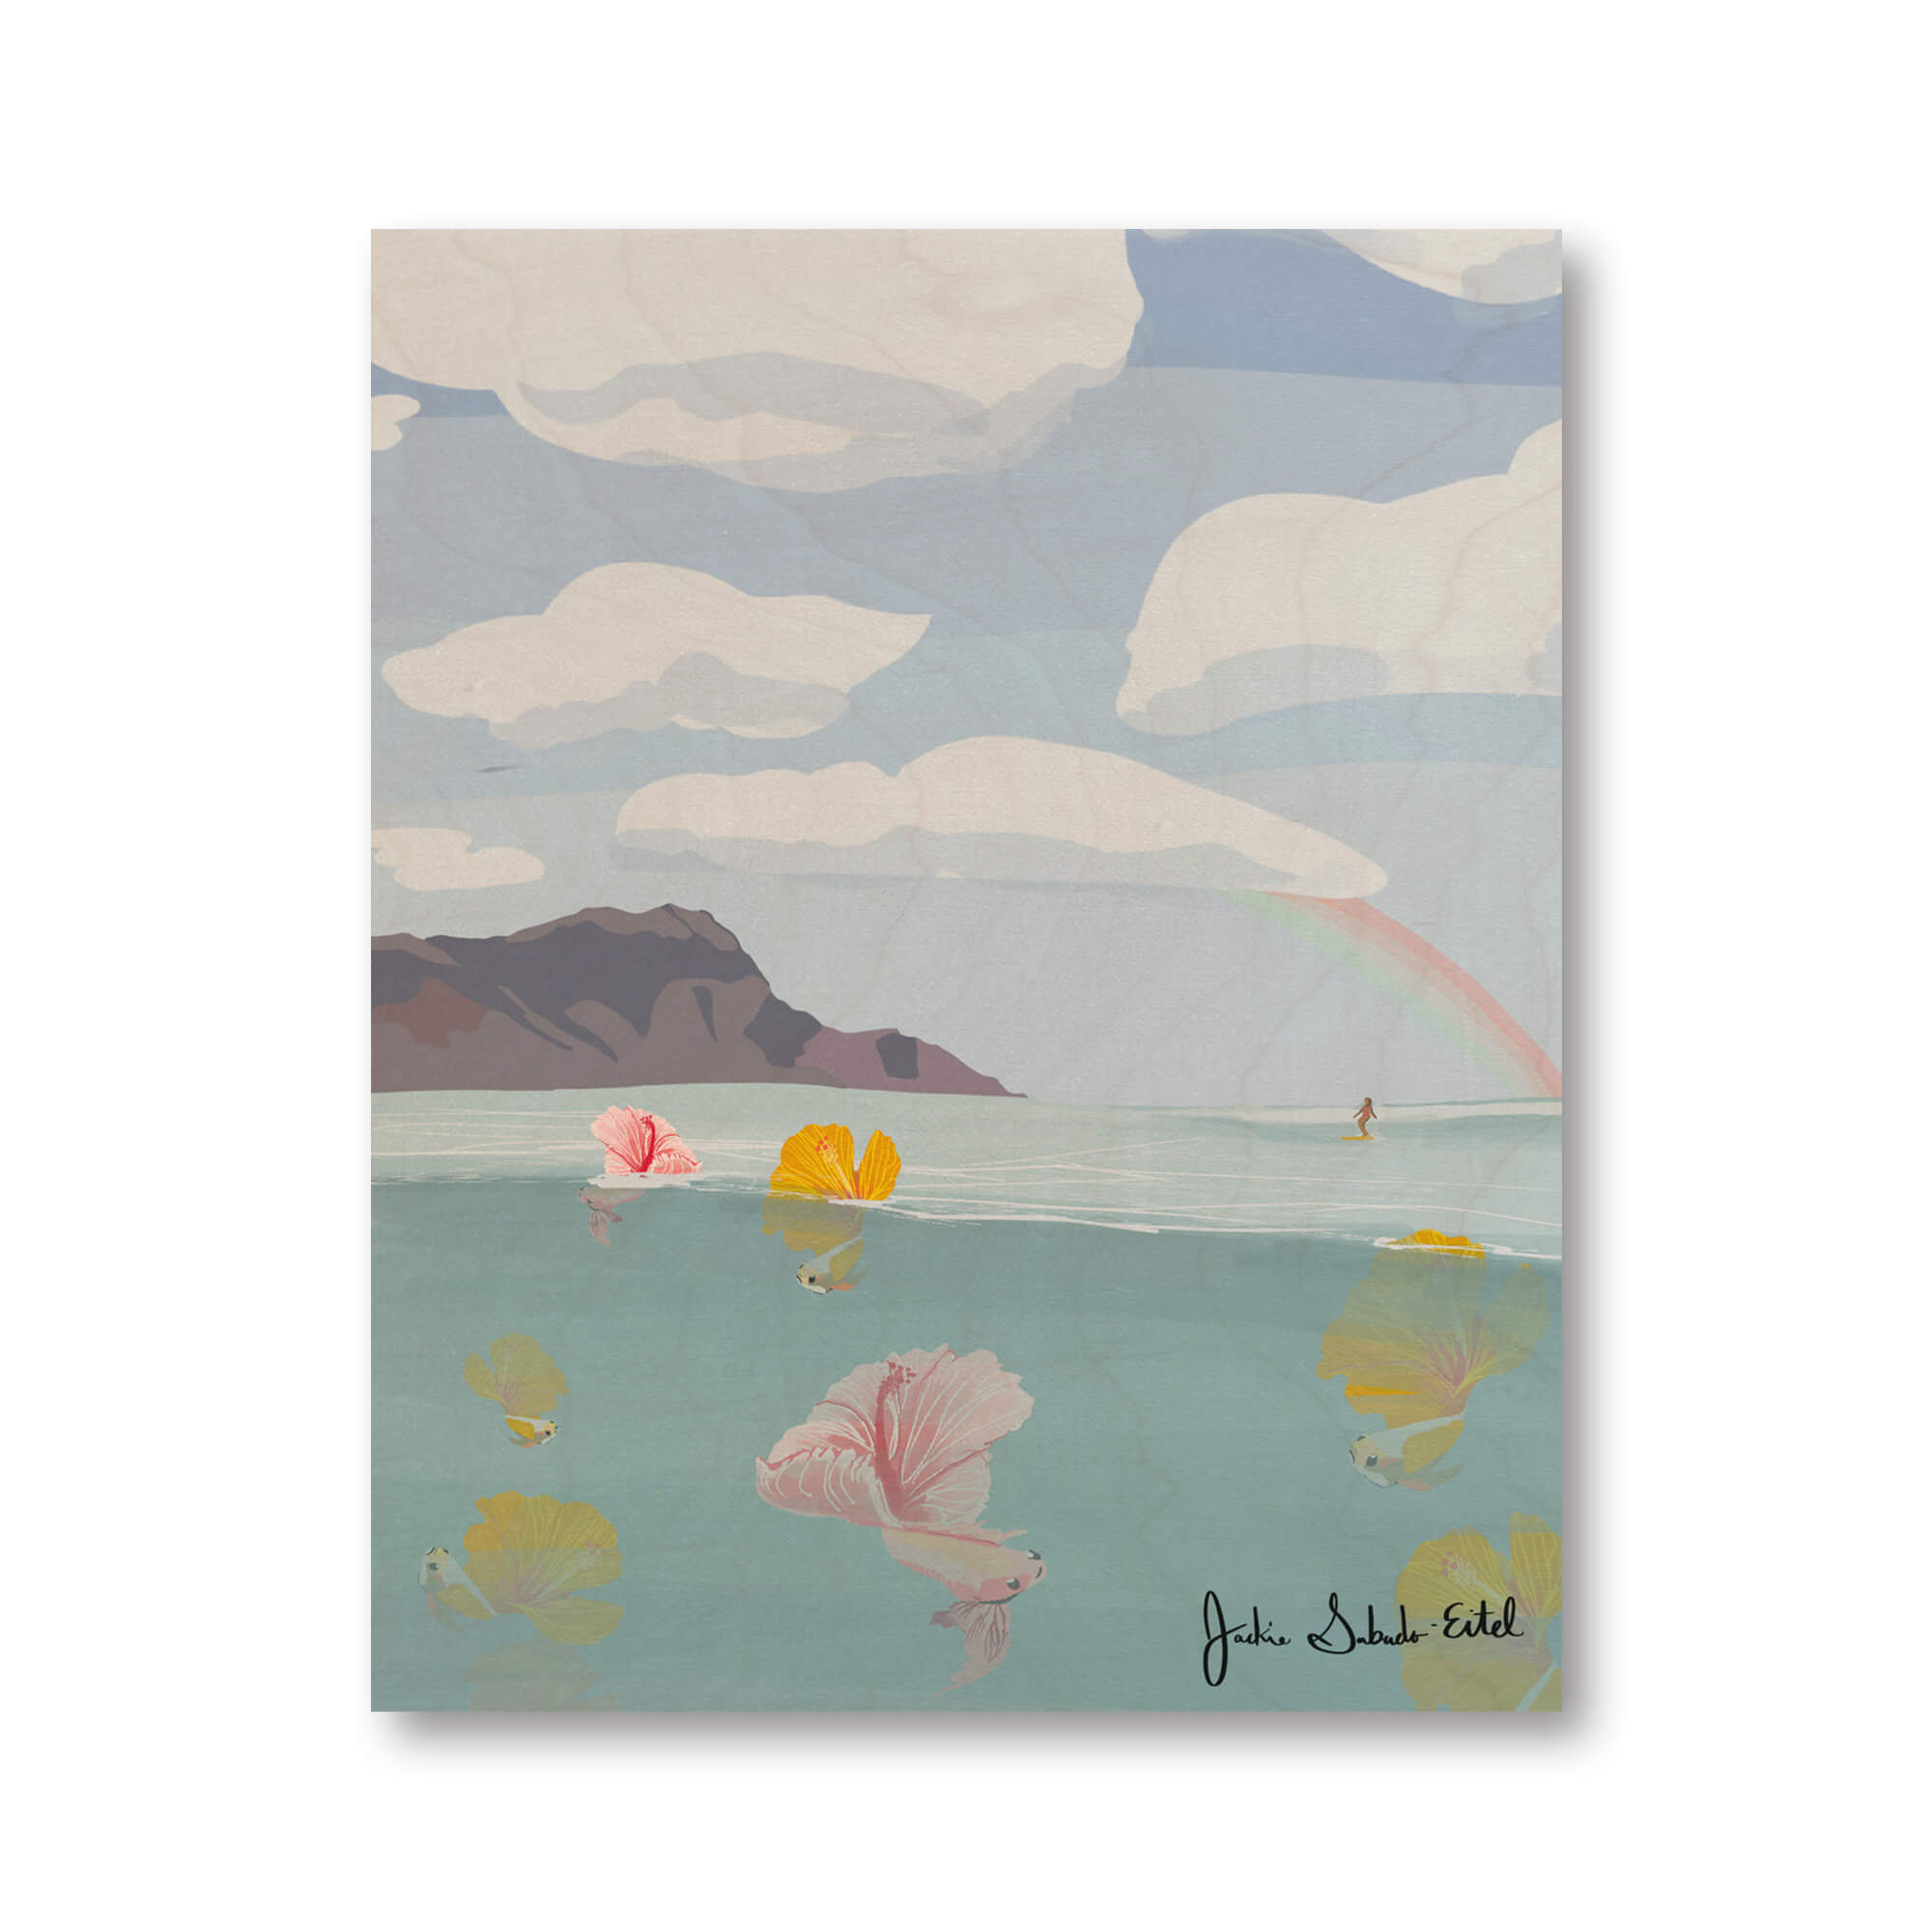 A wood print of colorful tropical fish with hibiscus flowers as their tails, the Diamond Head in the background with a woman surfing by Hawaii artist Jackie Eitel